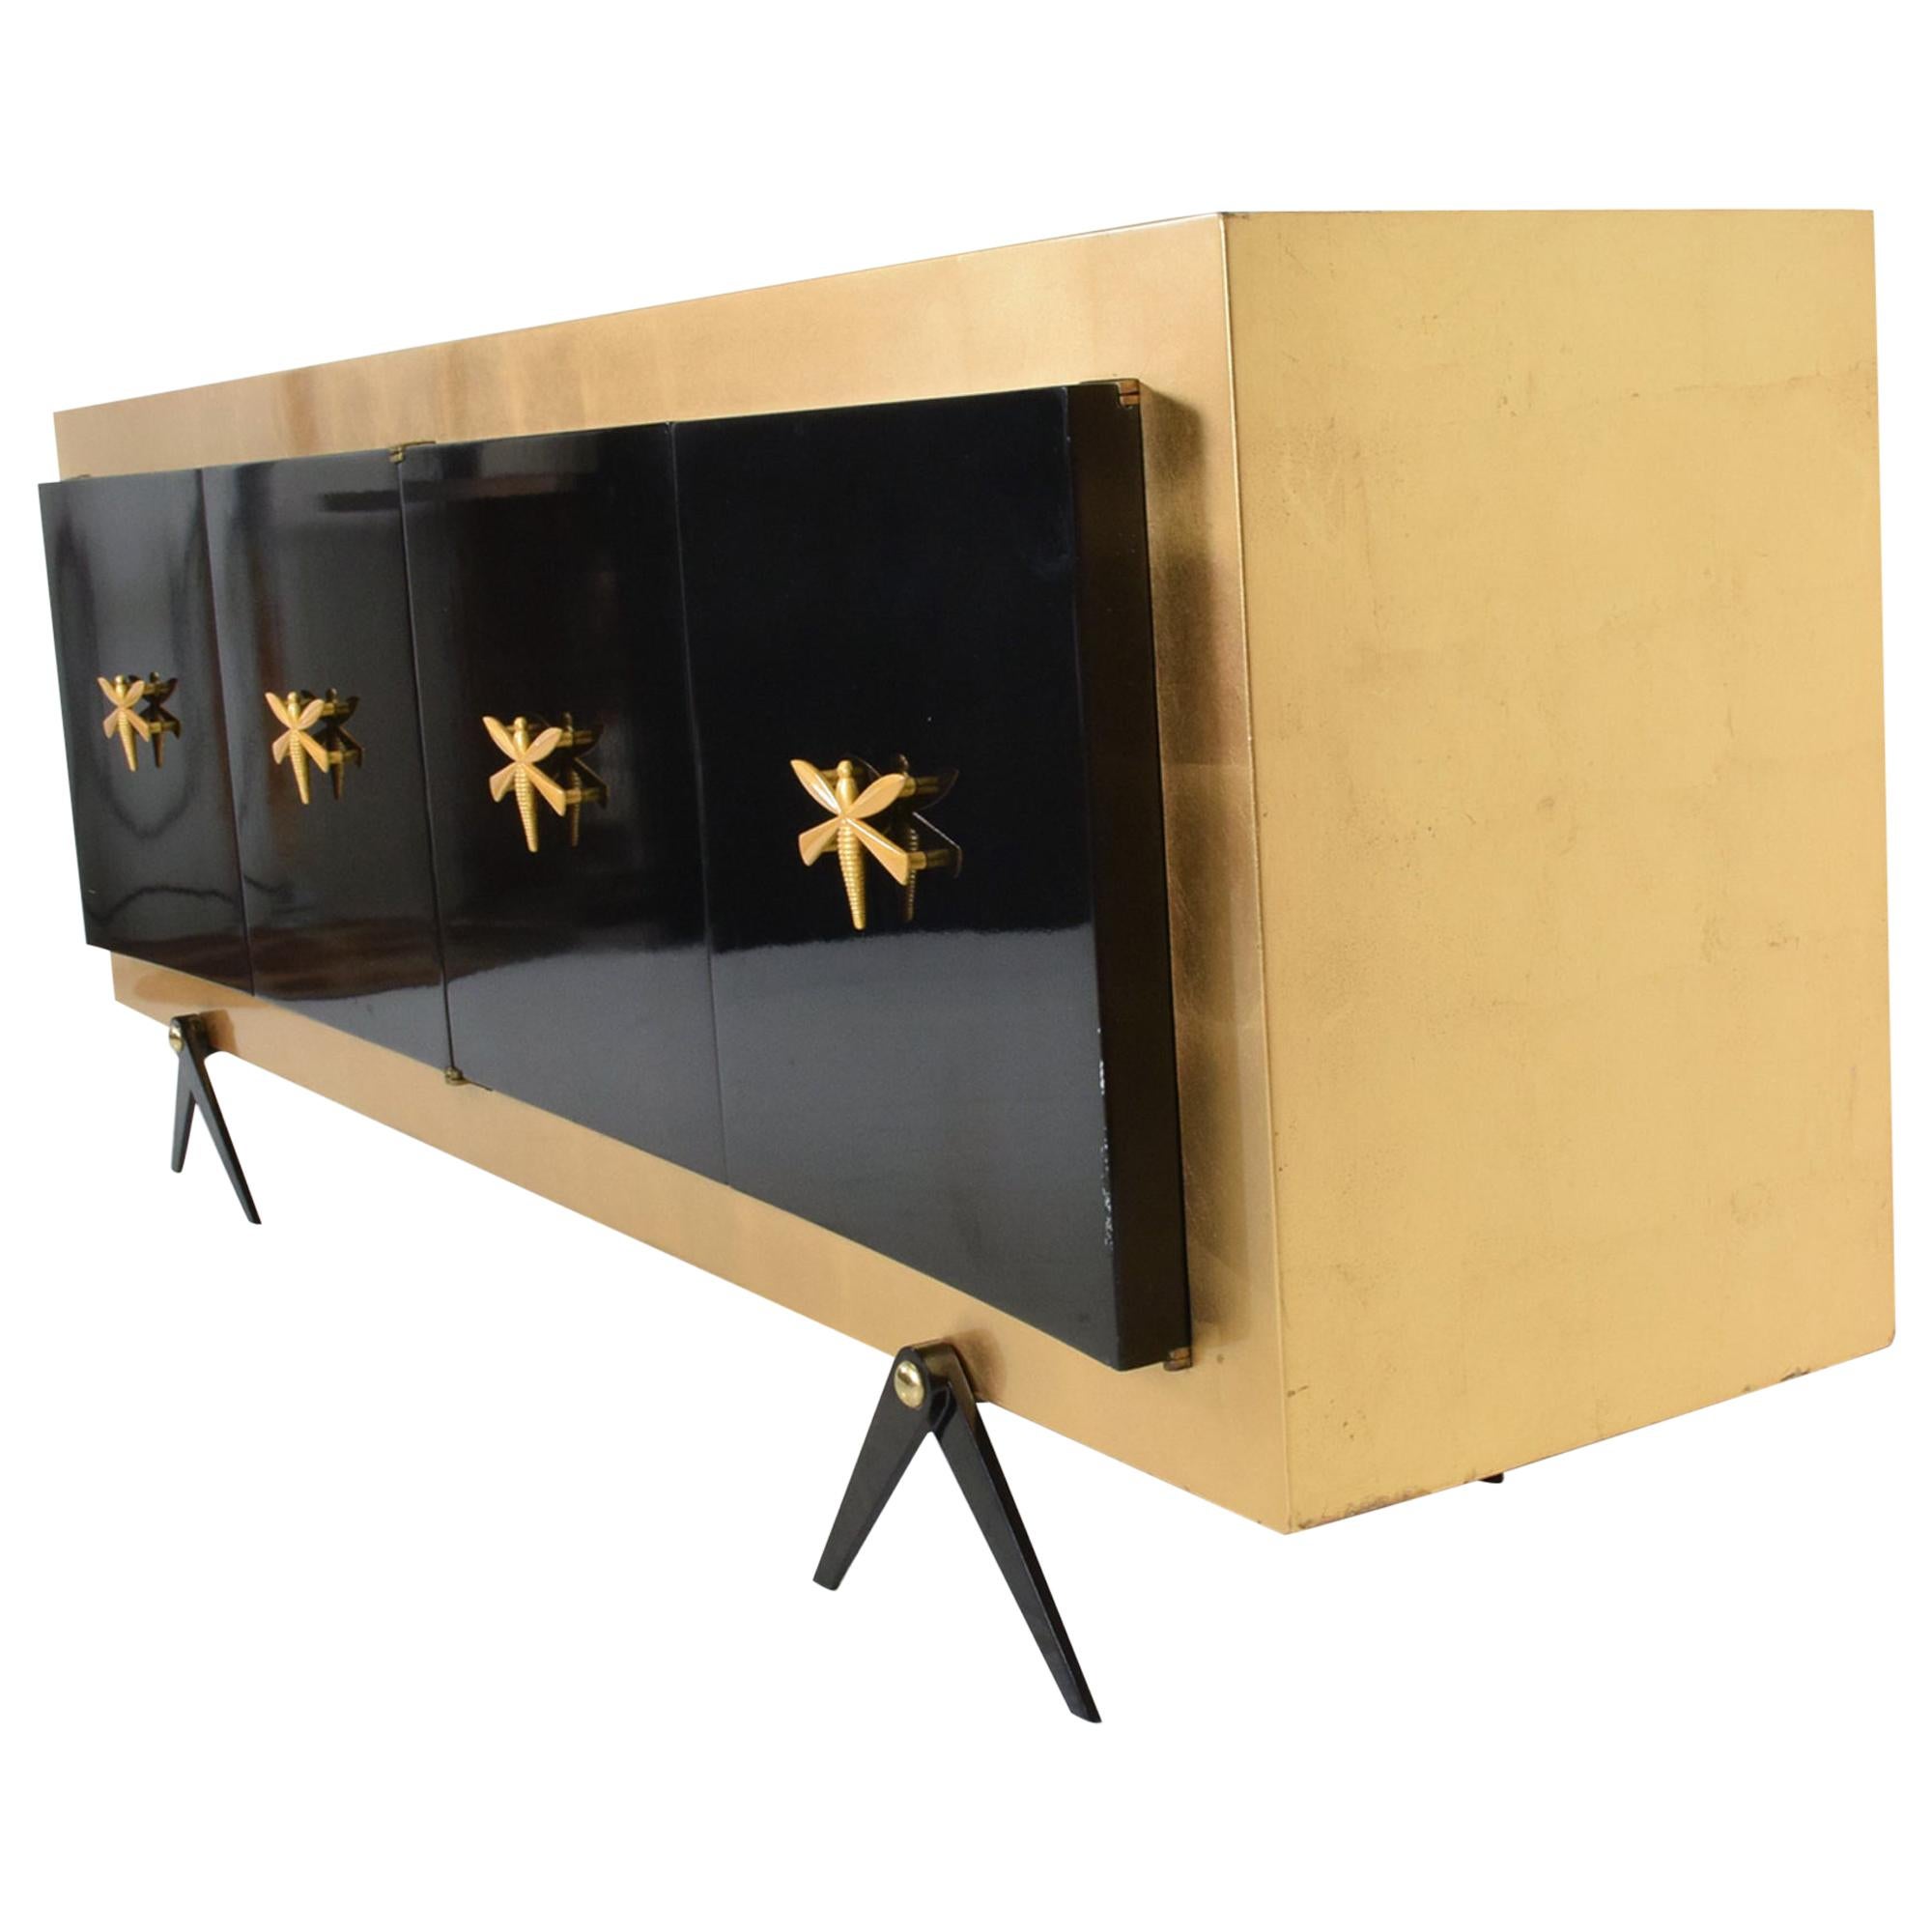 Credenza
Midcentury Mexican Modernist Stunning Custom Dragonfly adorned Credenza, attribution Arturo Pani.
Spectacular splayed legs
Unmarked. Mexico 1950s.
Sensational Bronze pull handles on four doors. 
Open shelf storage, no drawers. 
90.63 L x 21